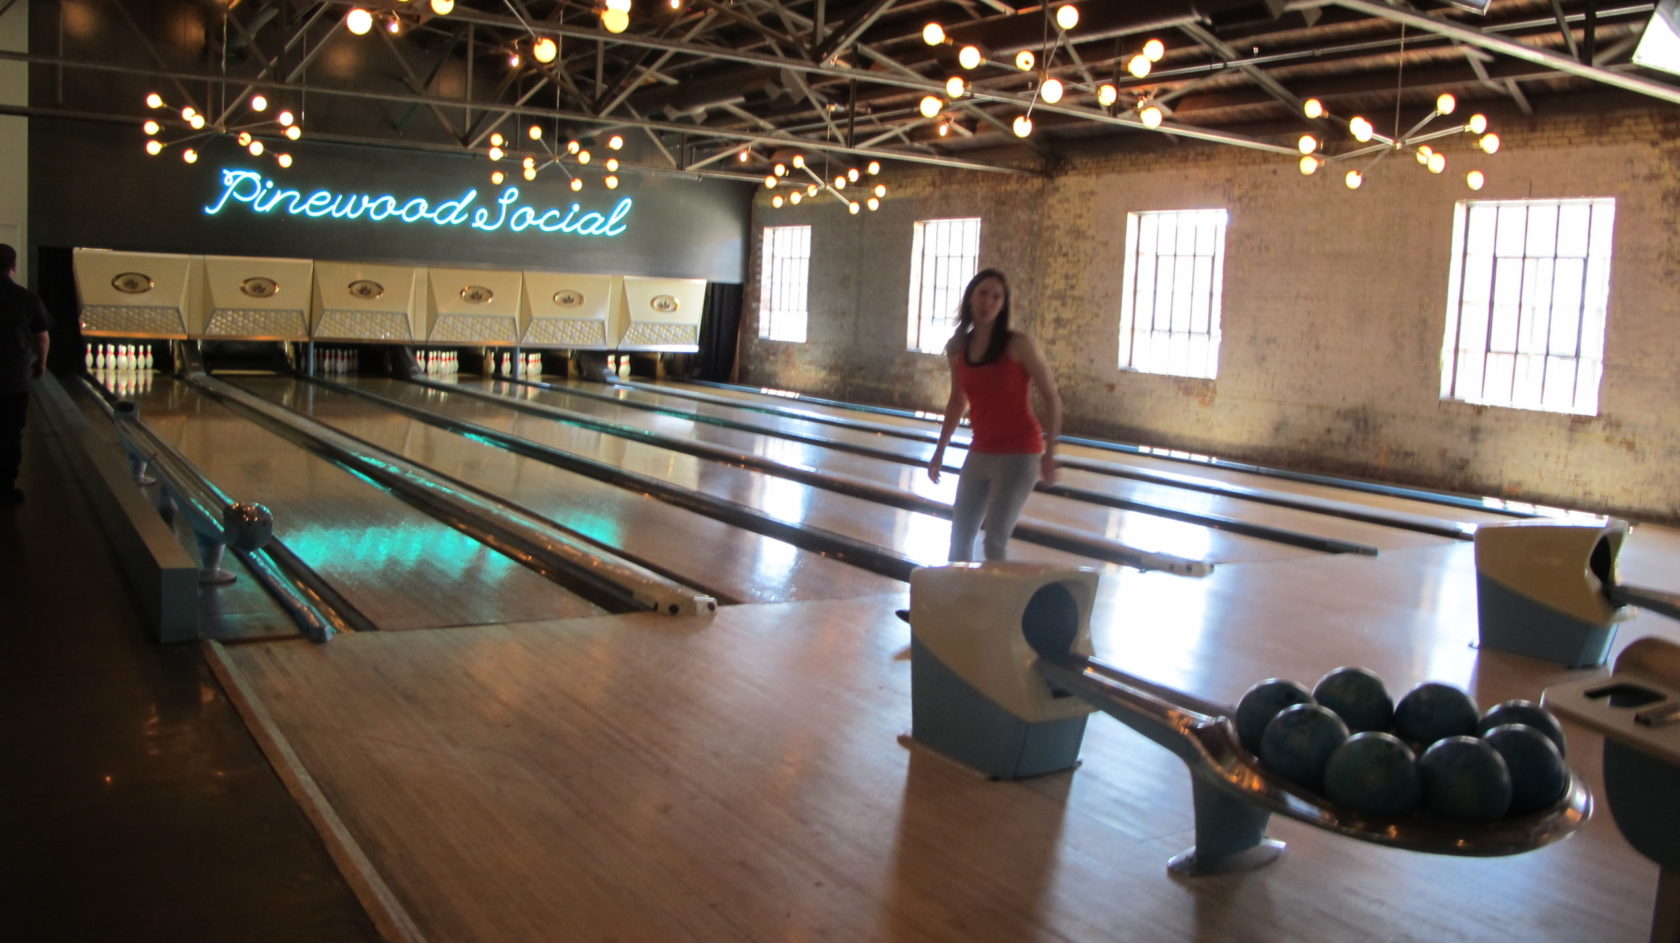 Hipster bowling alleys are signs of hipster things to come.